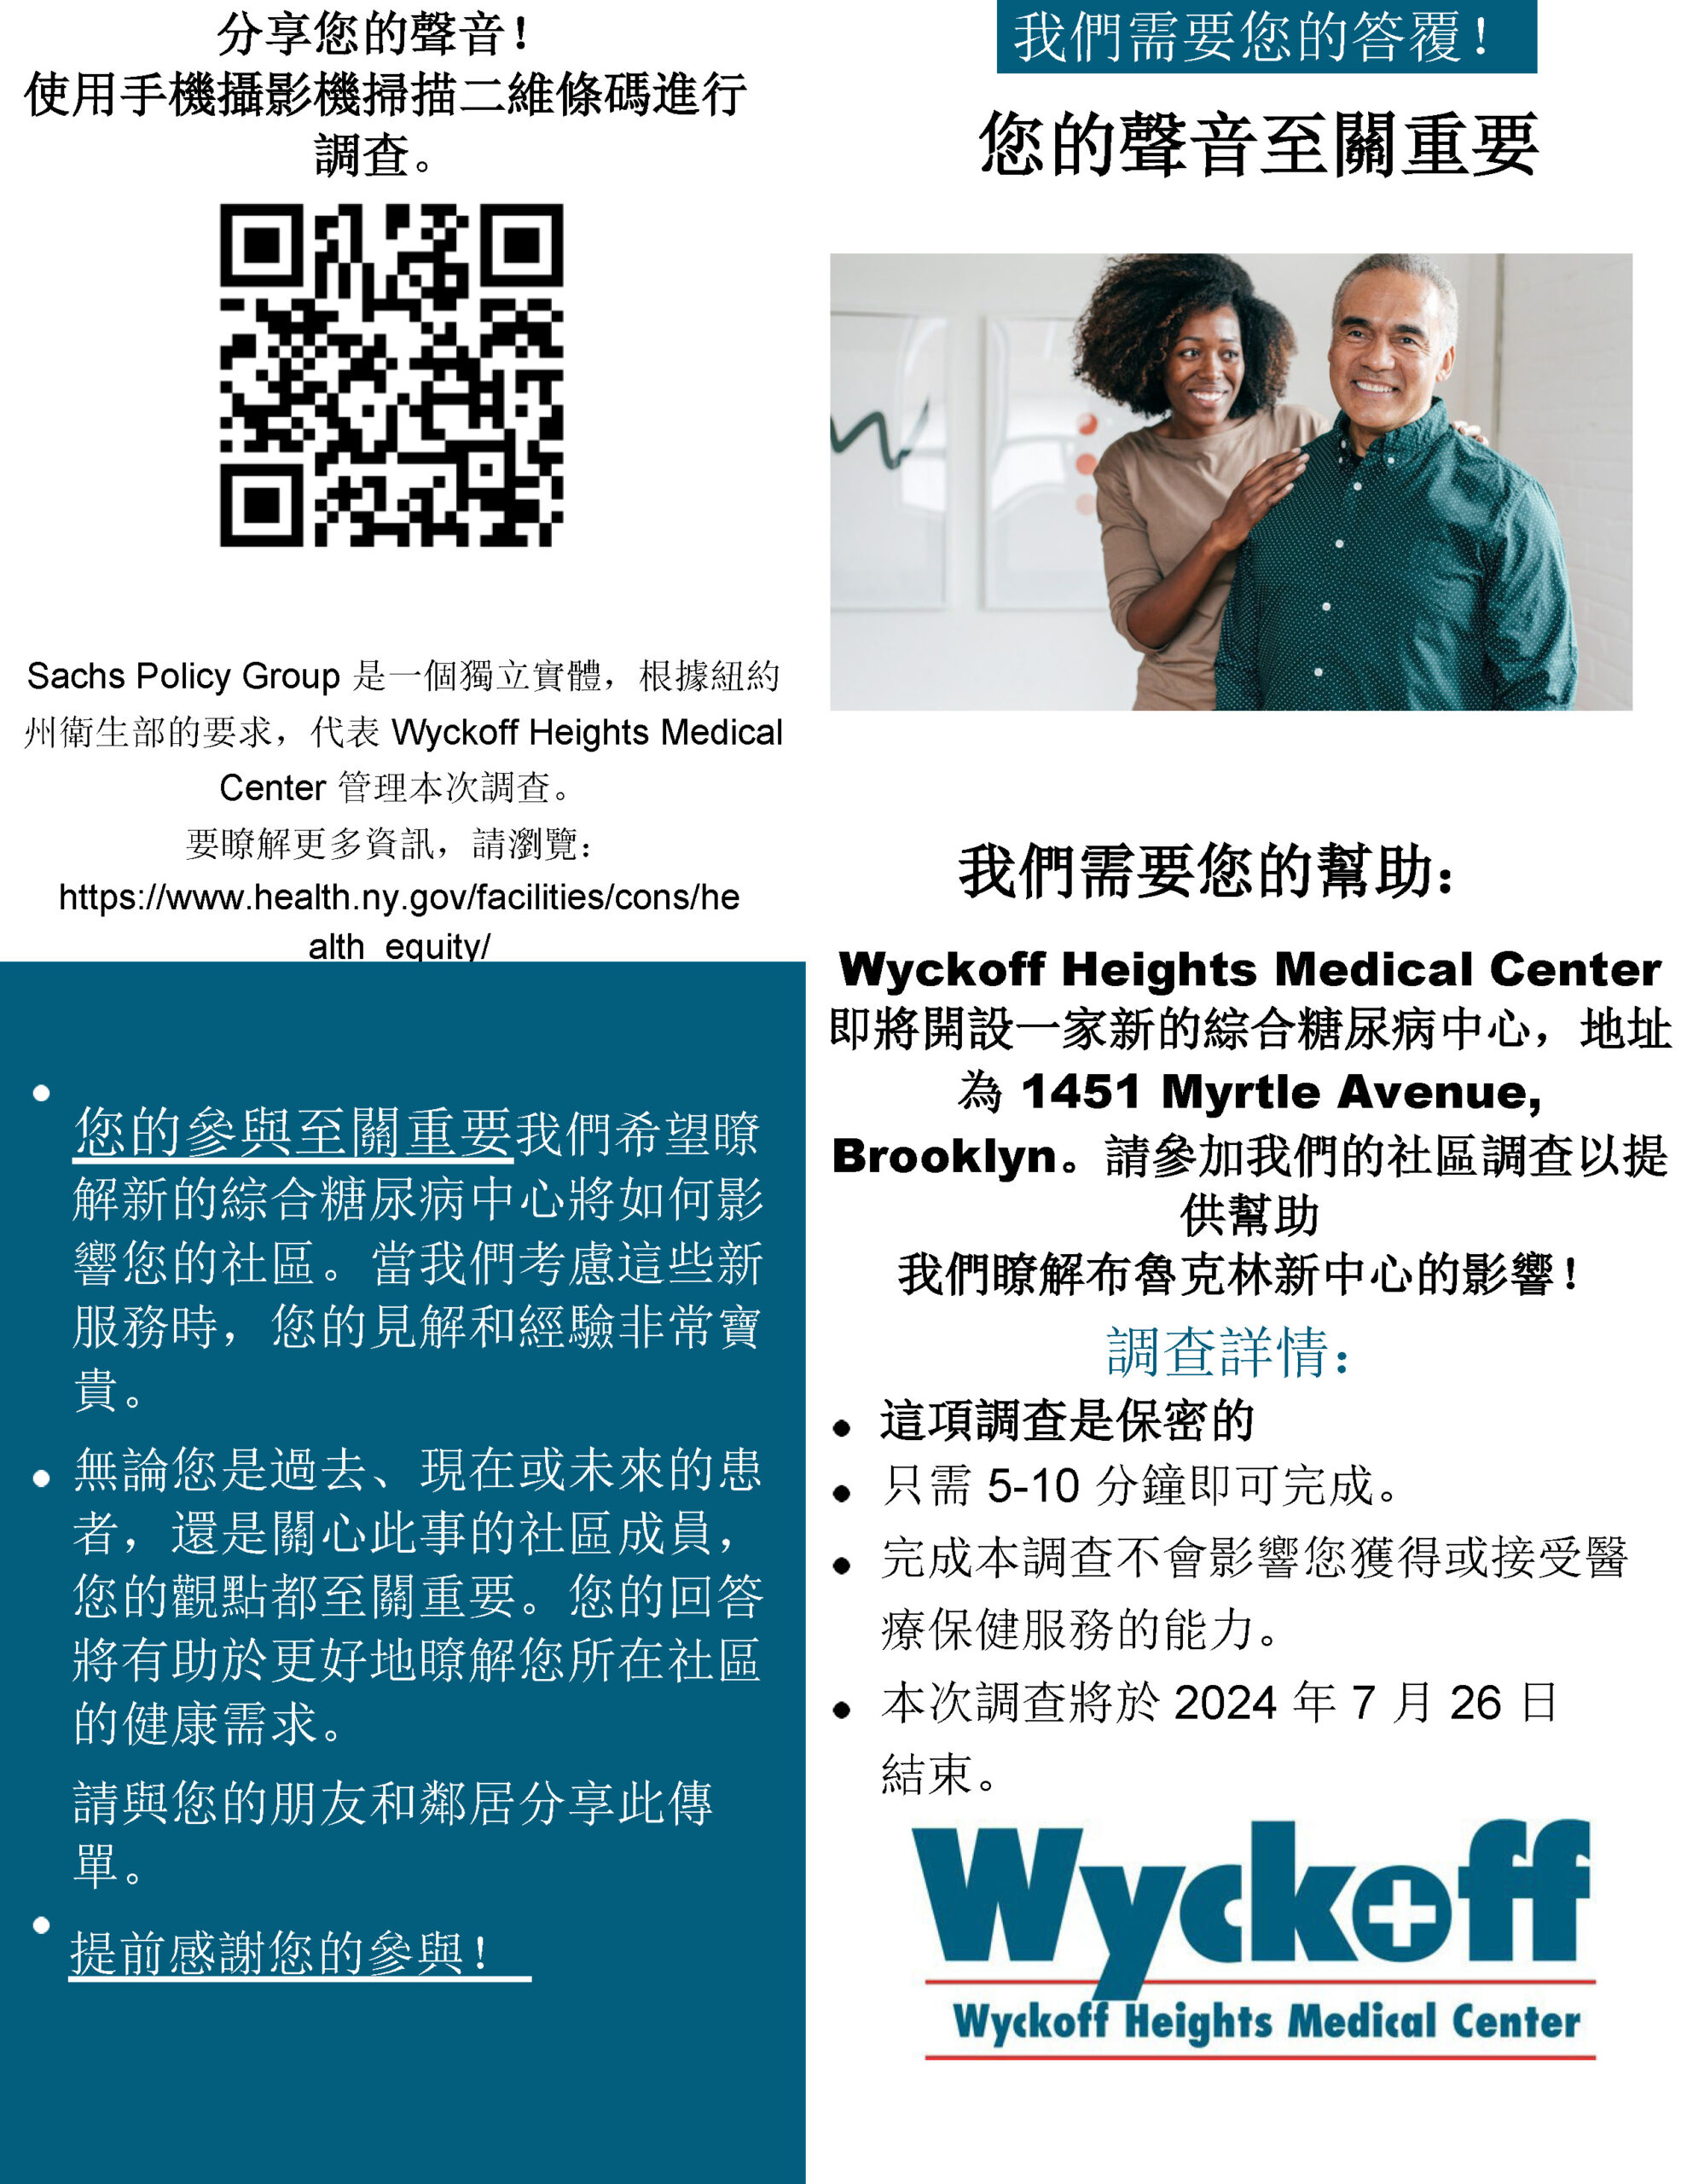 Wyckoff Heights Survey Flier (diabetes) 7-9-24_Chinese- Mandarin Traditional